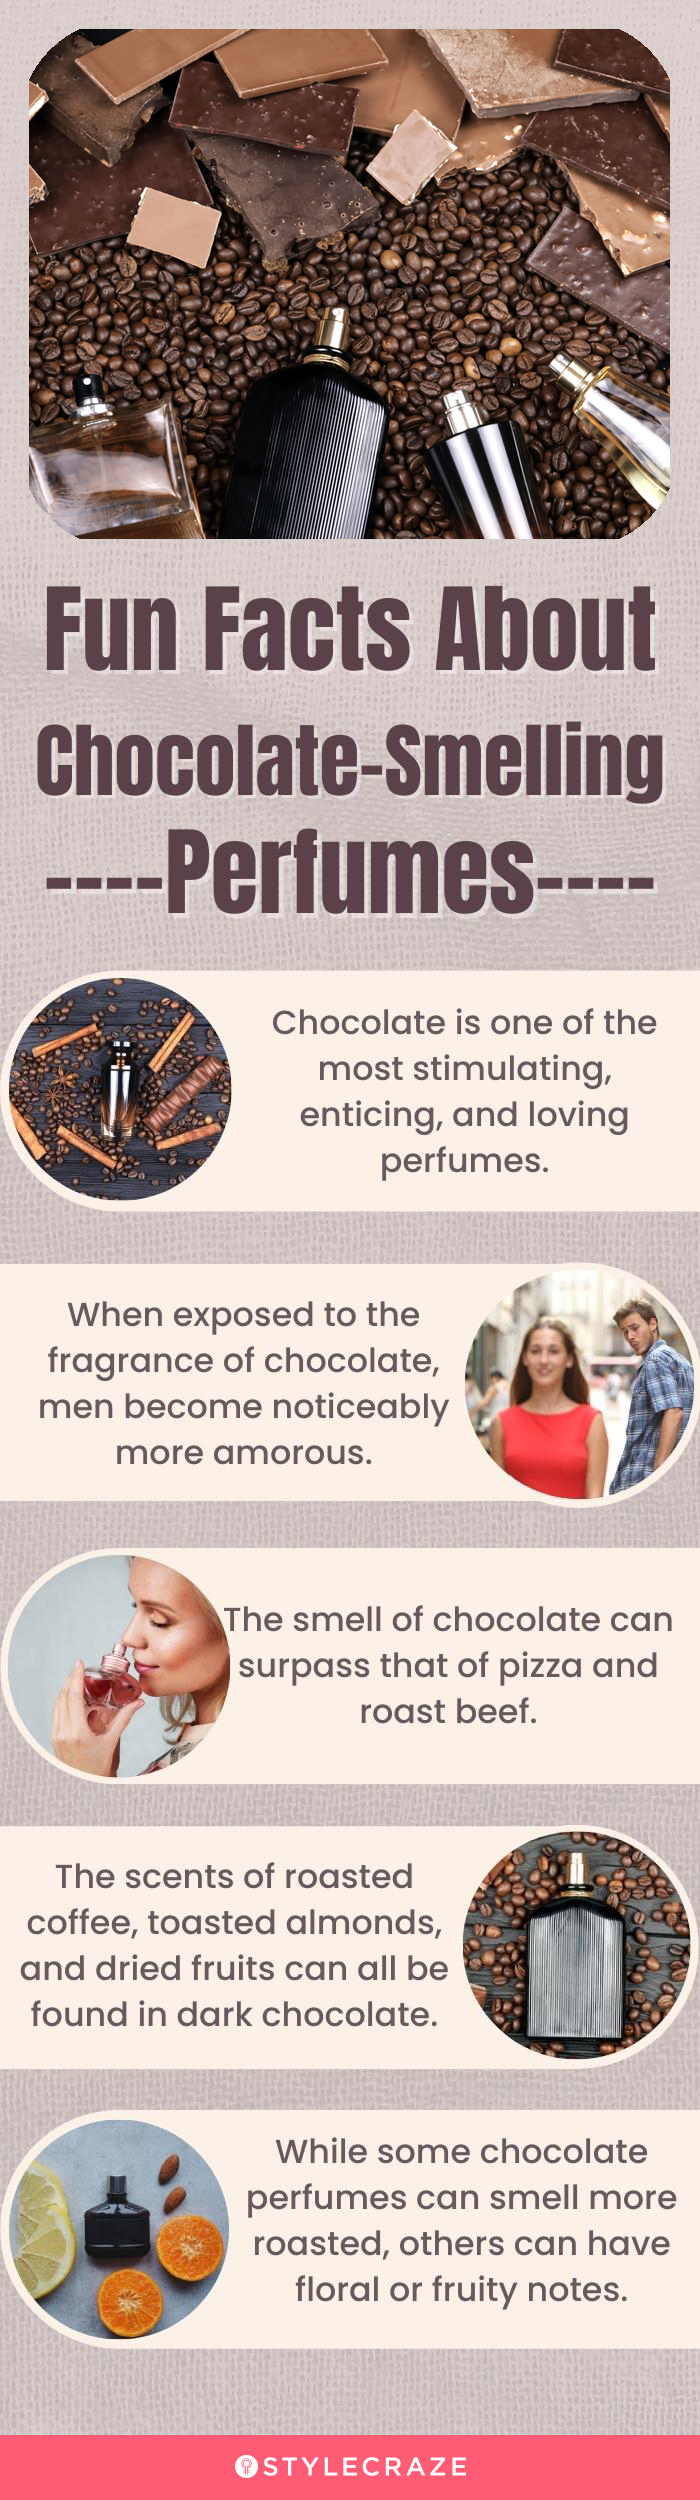 Fun Facts About Chocolate-Smelling Perfumes (infographic)